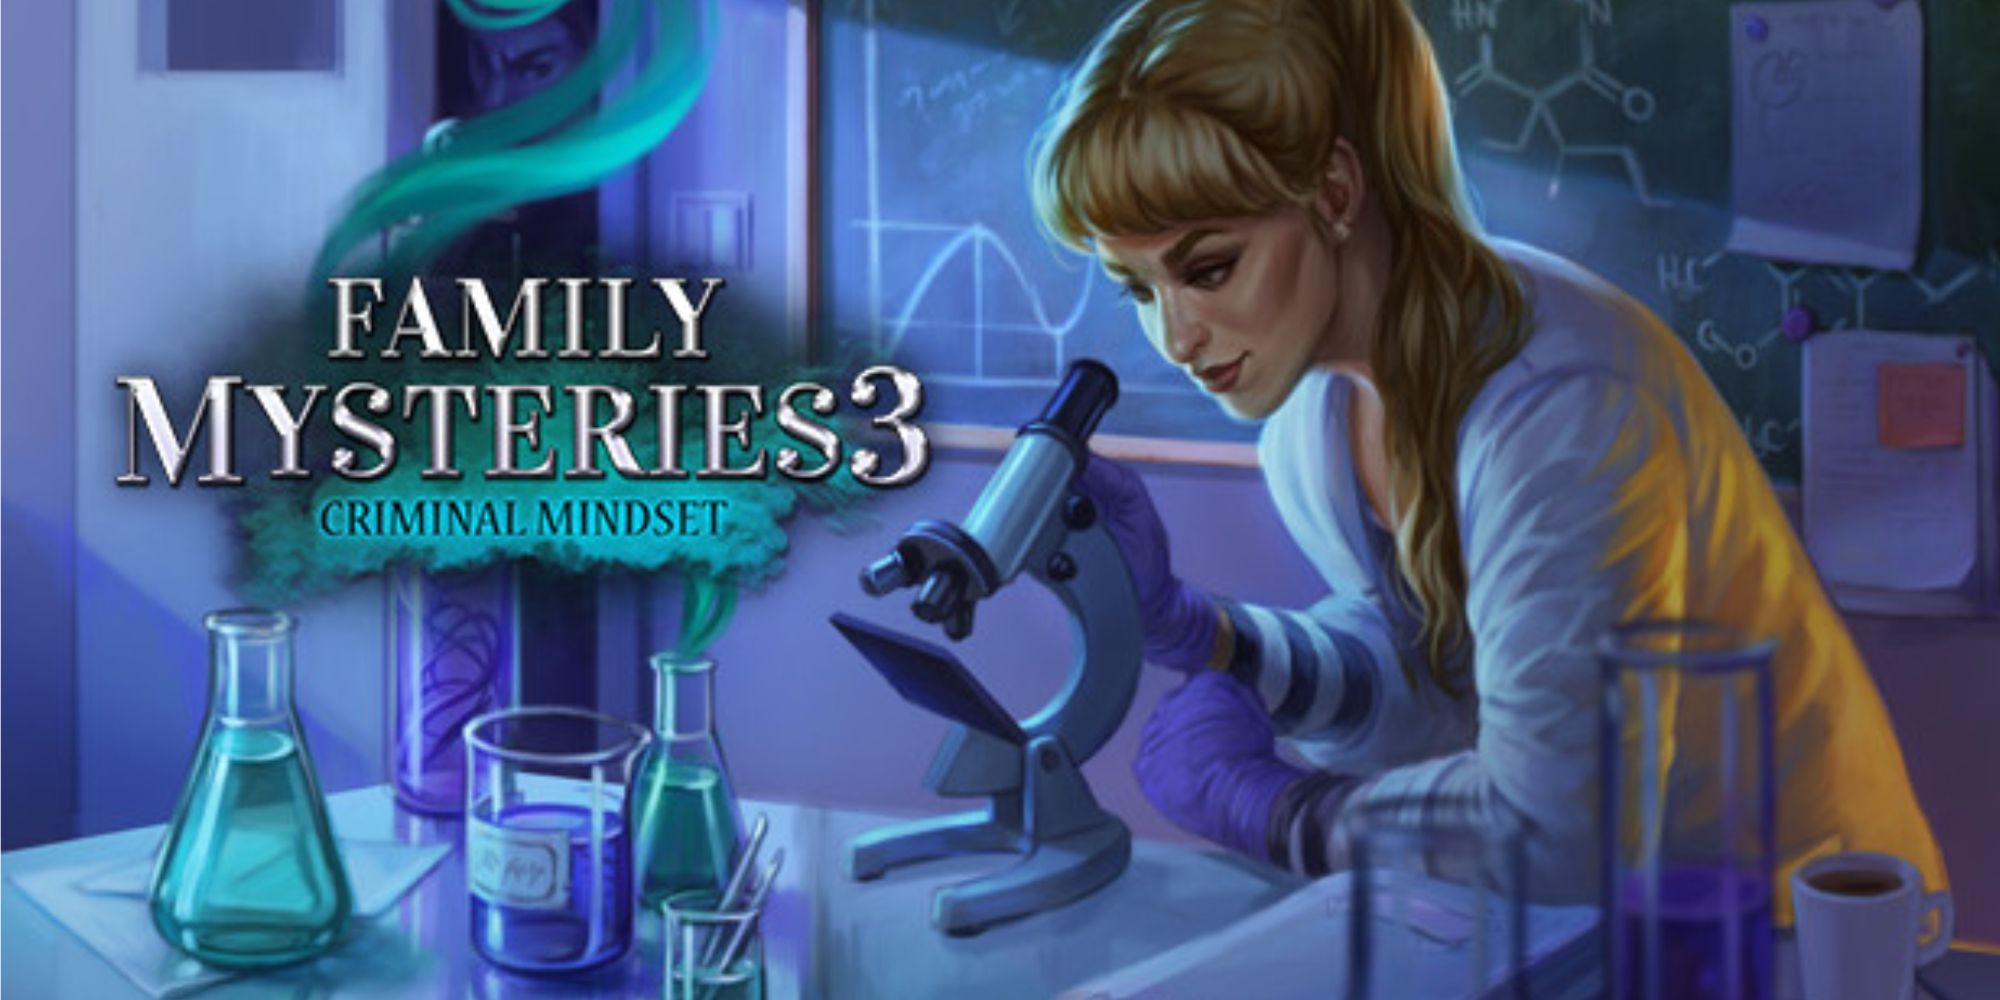 Family Mysteries 3 Criminal Mindset Cover Image Woman Working In Chemistry Lab